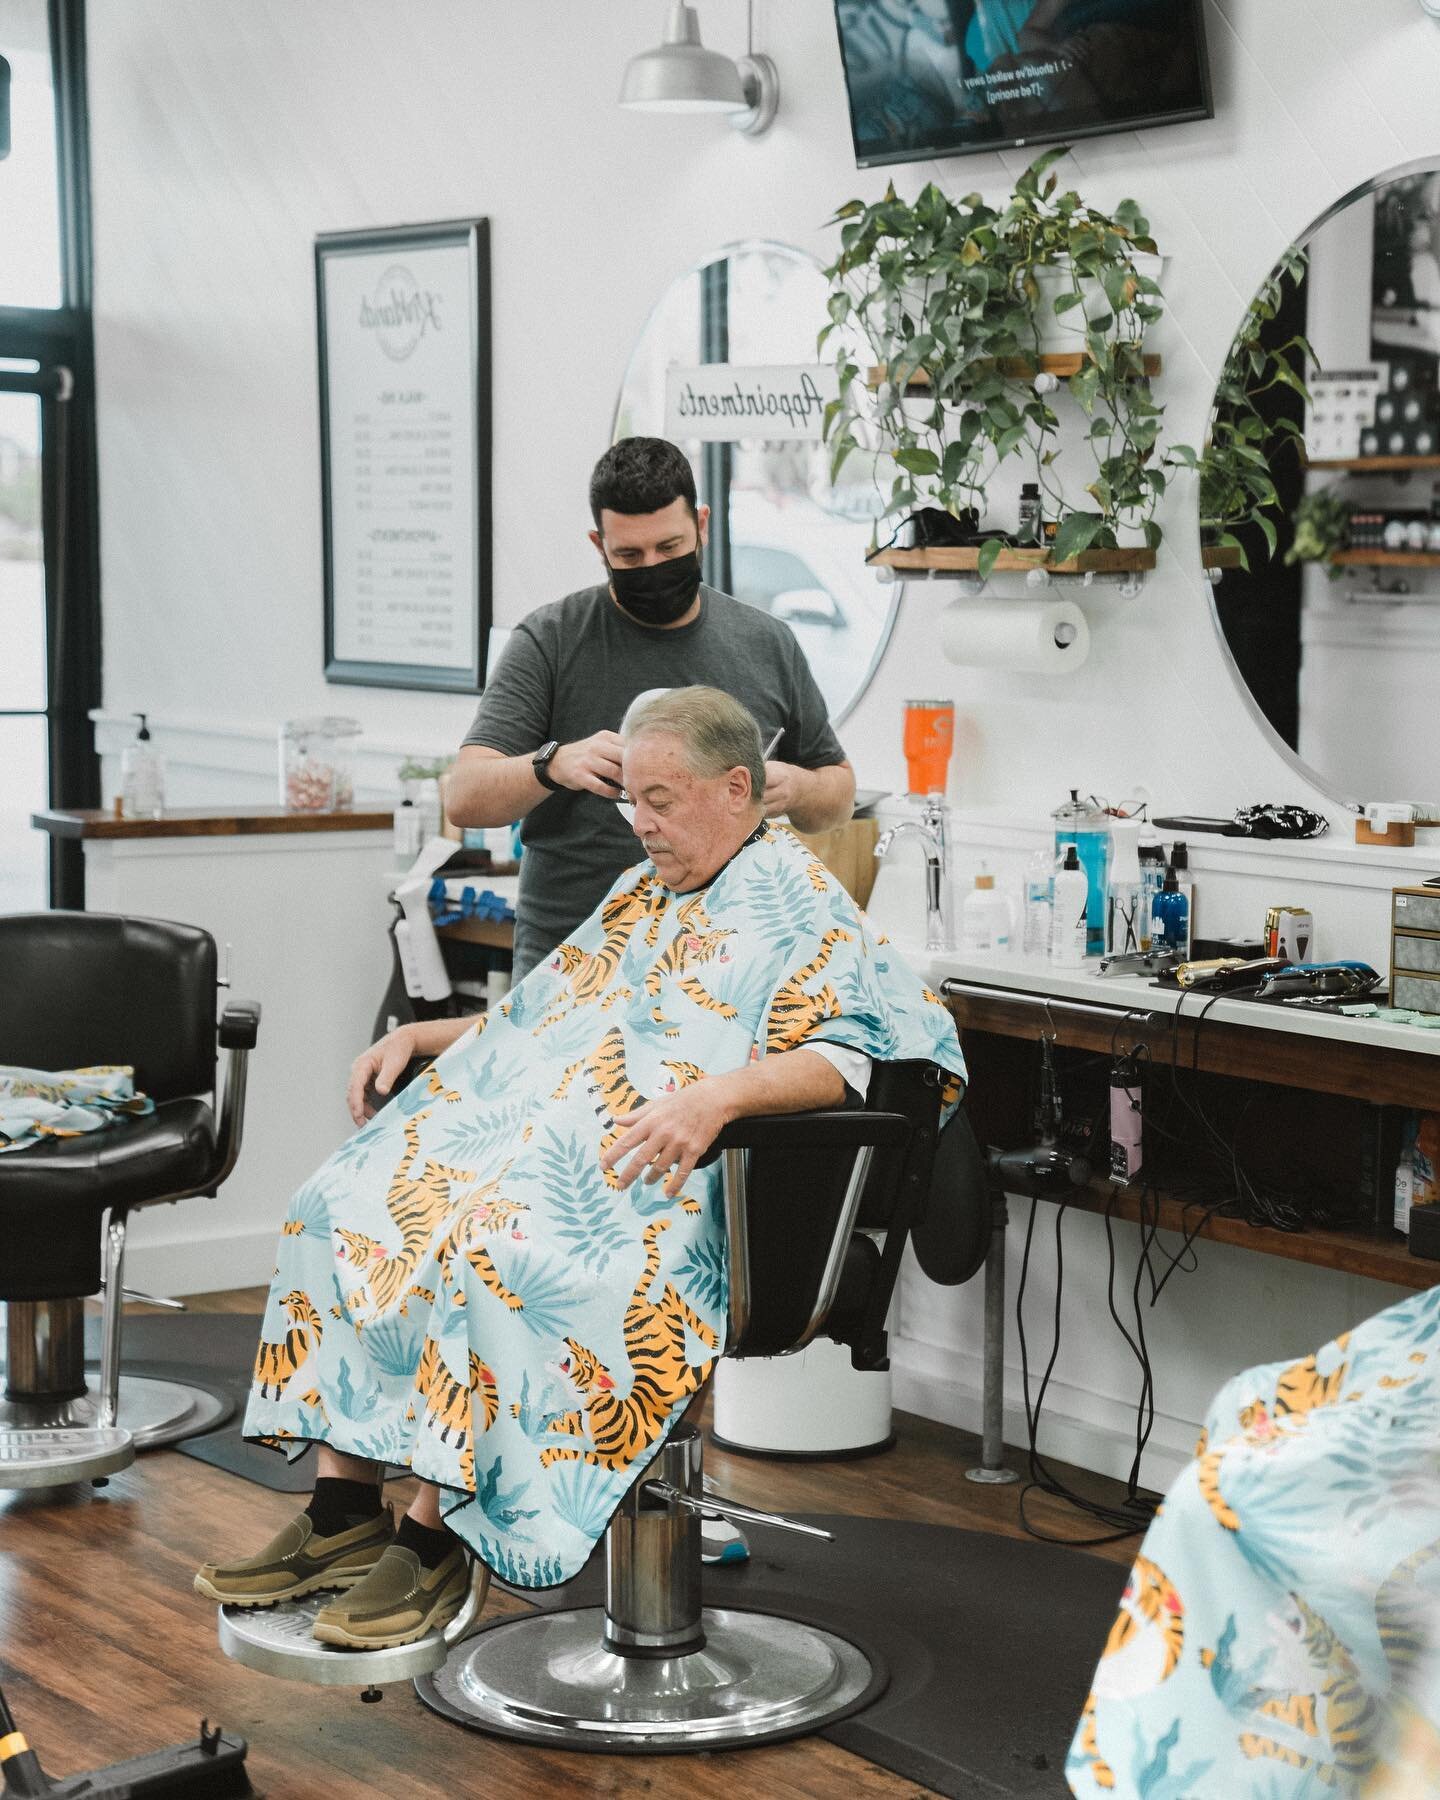 New month = fresh cut ✂️ remember our  barbers are here and available for wwalk-ins EVERYDAY! 

But if you&rsquo;d rather schedule an appointment, check our out website - link in bio 👌🏼 
.
.
.
.
#wahlmagicclip #barbercollege #bestofbarbers #nationa